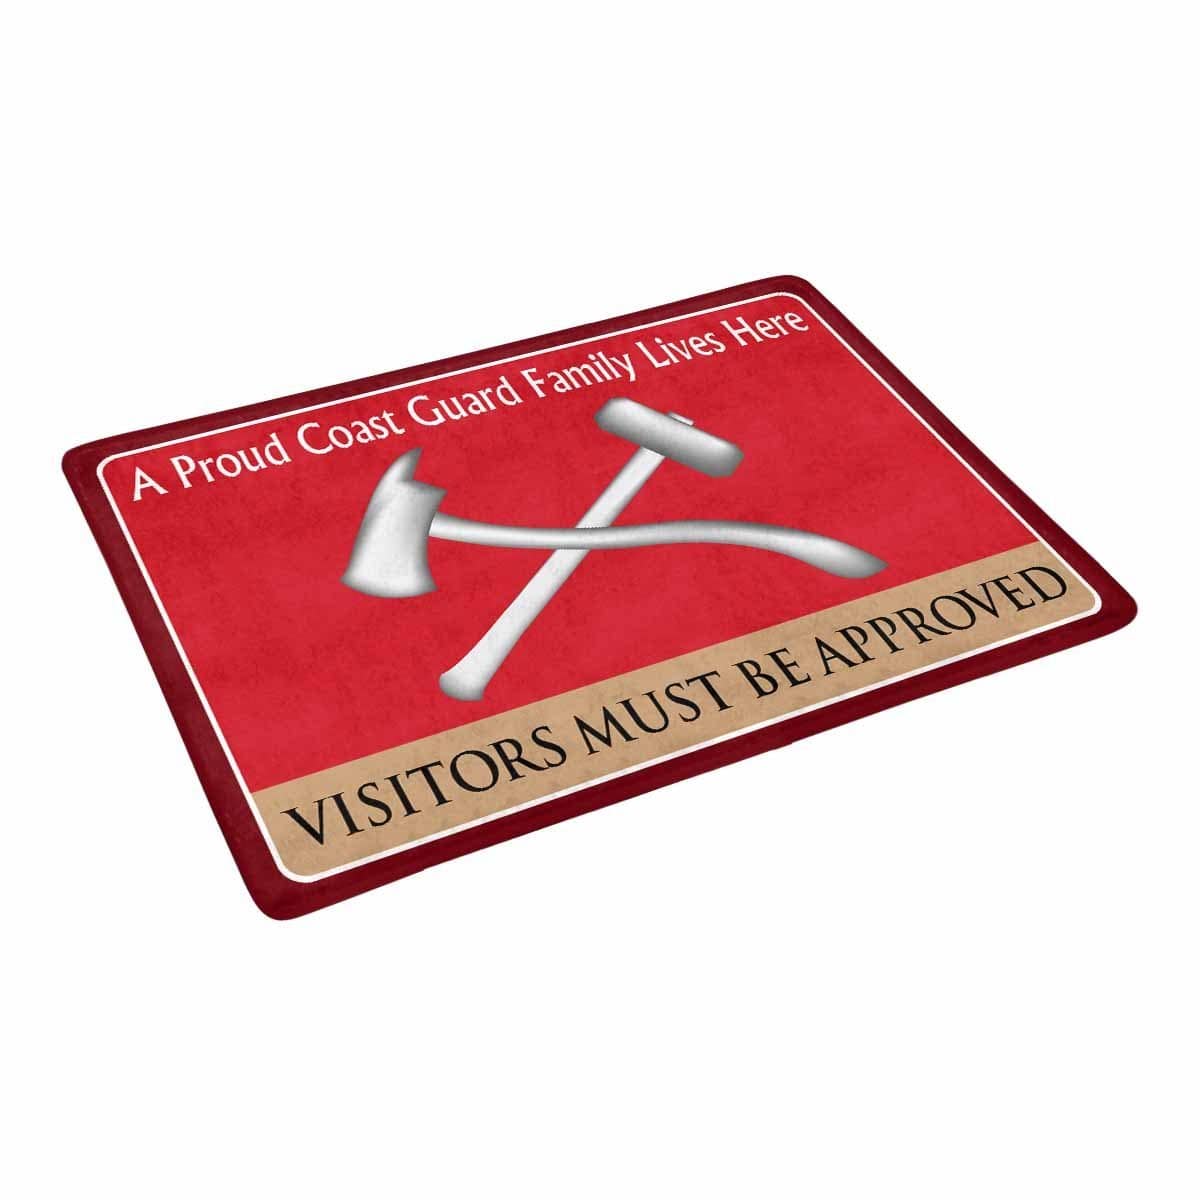 US Coast Guard Damage Controlman DC Logo Family Doormat - Visitors must be approved (23.6 inches x 15.7 inches)-Doormat-USCG-Rate-Veterans Nation